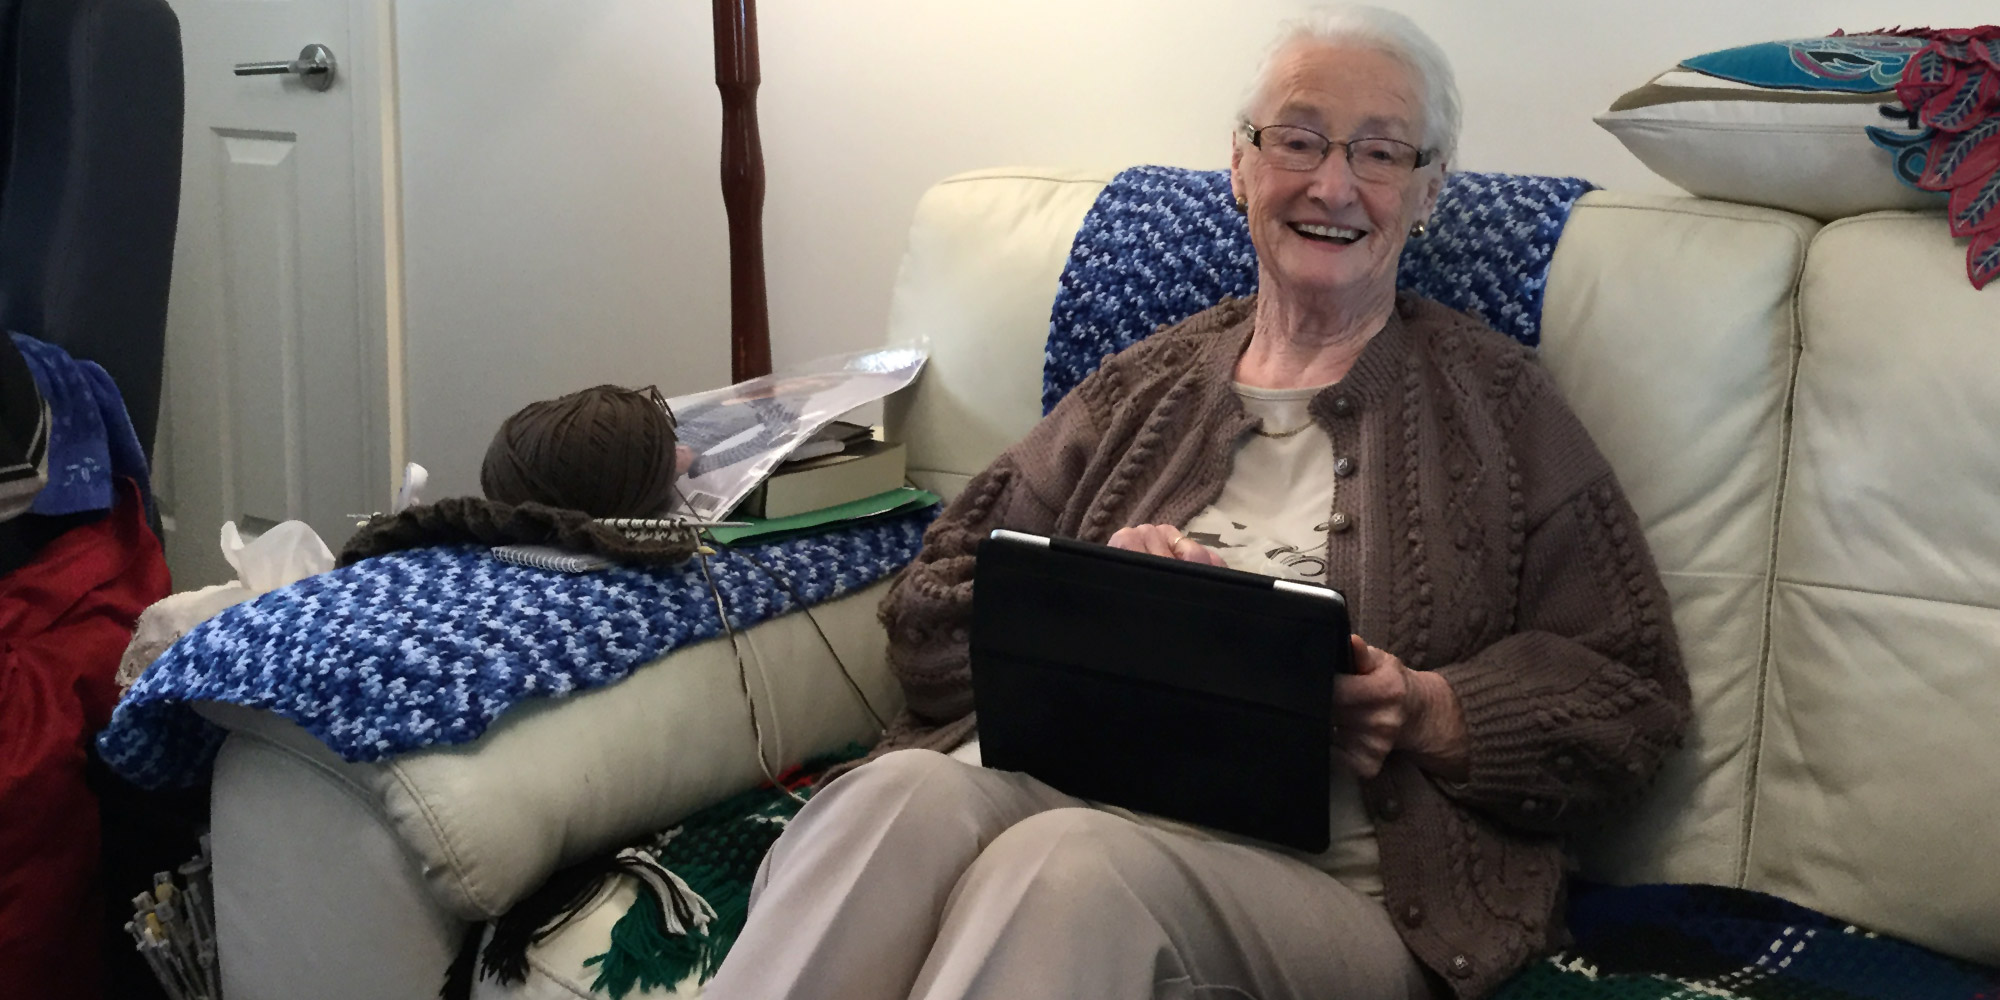 Kincare Customer Mary aged 87 smiling and using her iPad sitting on her sofa at home